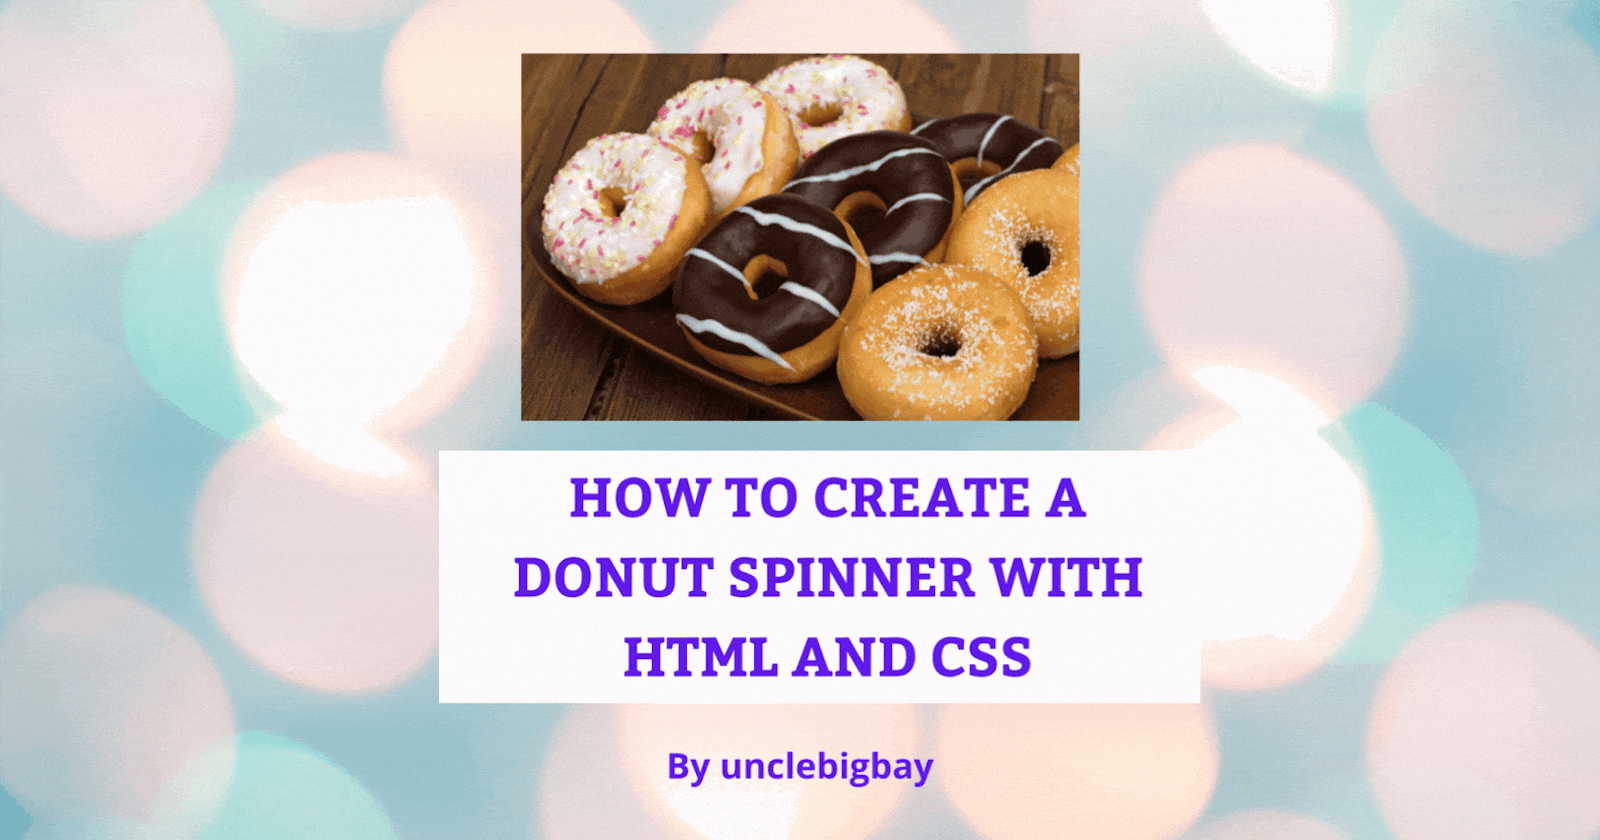 How To Create A Donut Spinner With HTML and CSS